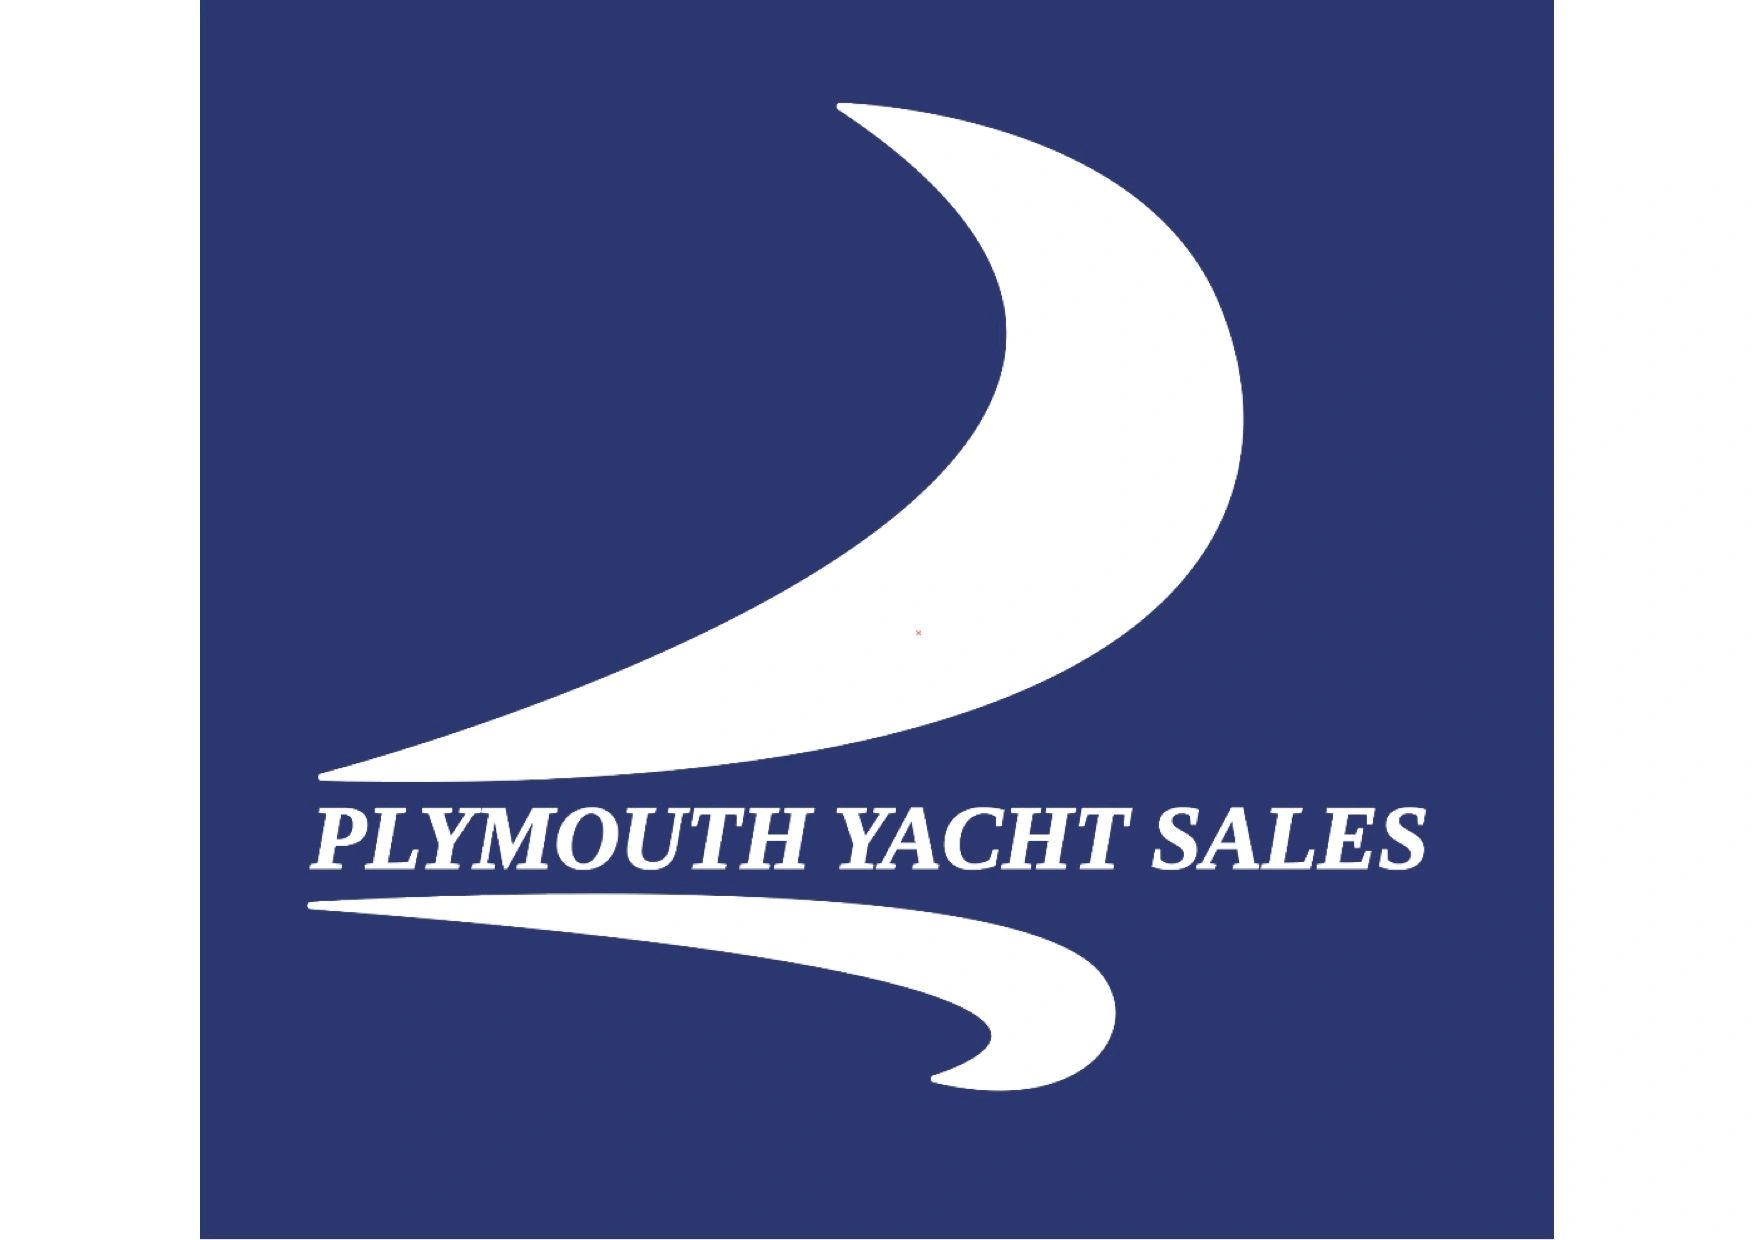 yacht sales plymouth